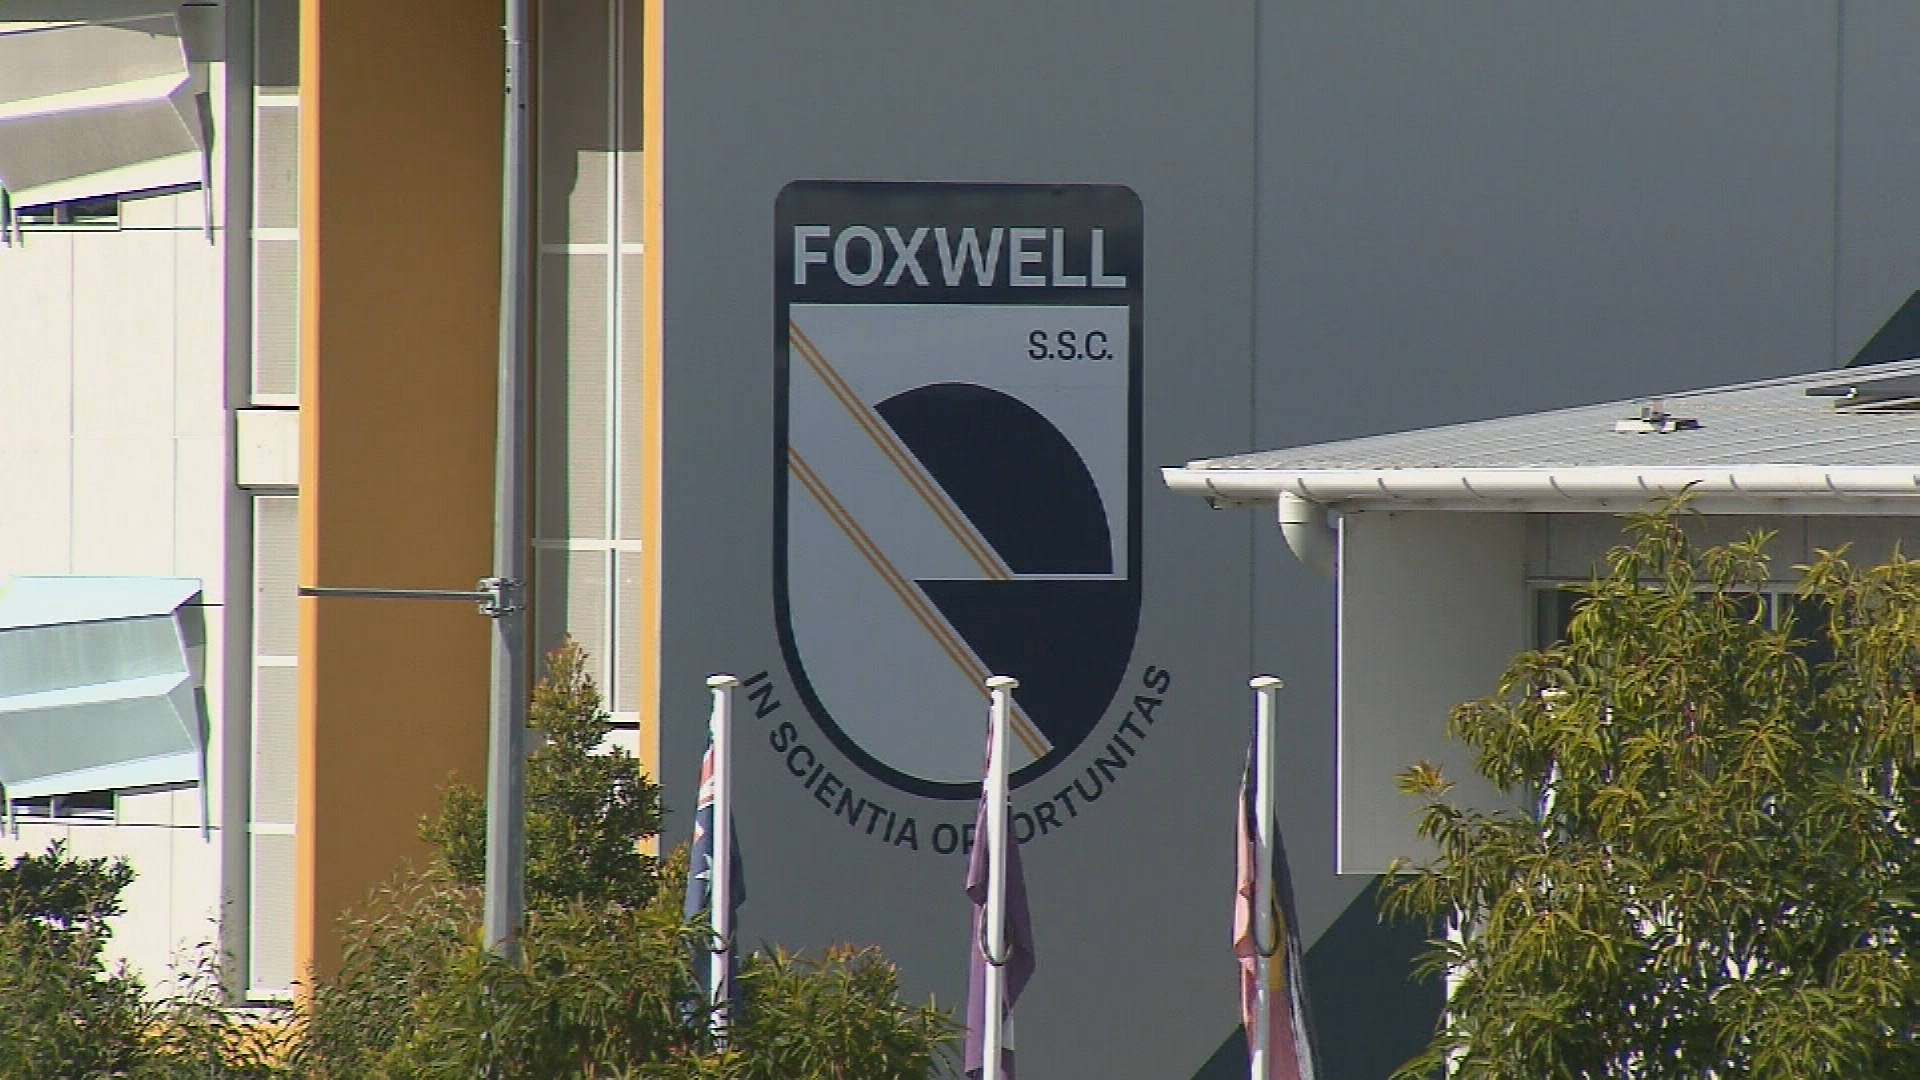 A Gold Coast teenager has been charged over an alleged list ranking female students from Foxwell state Secondary College in Coomera.